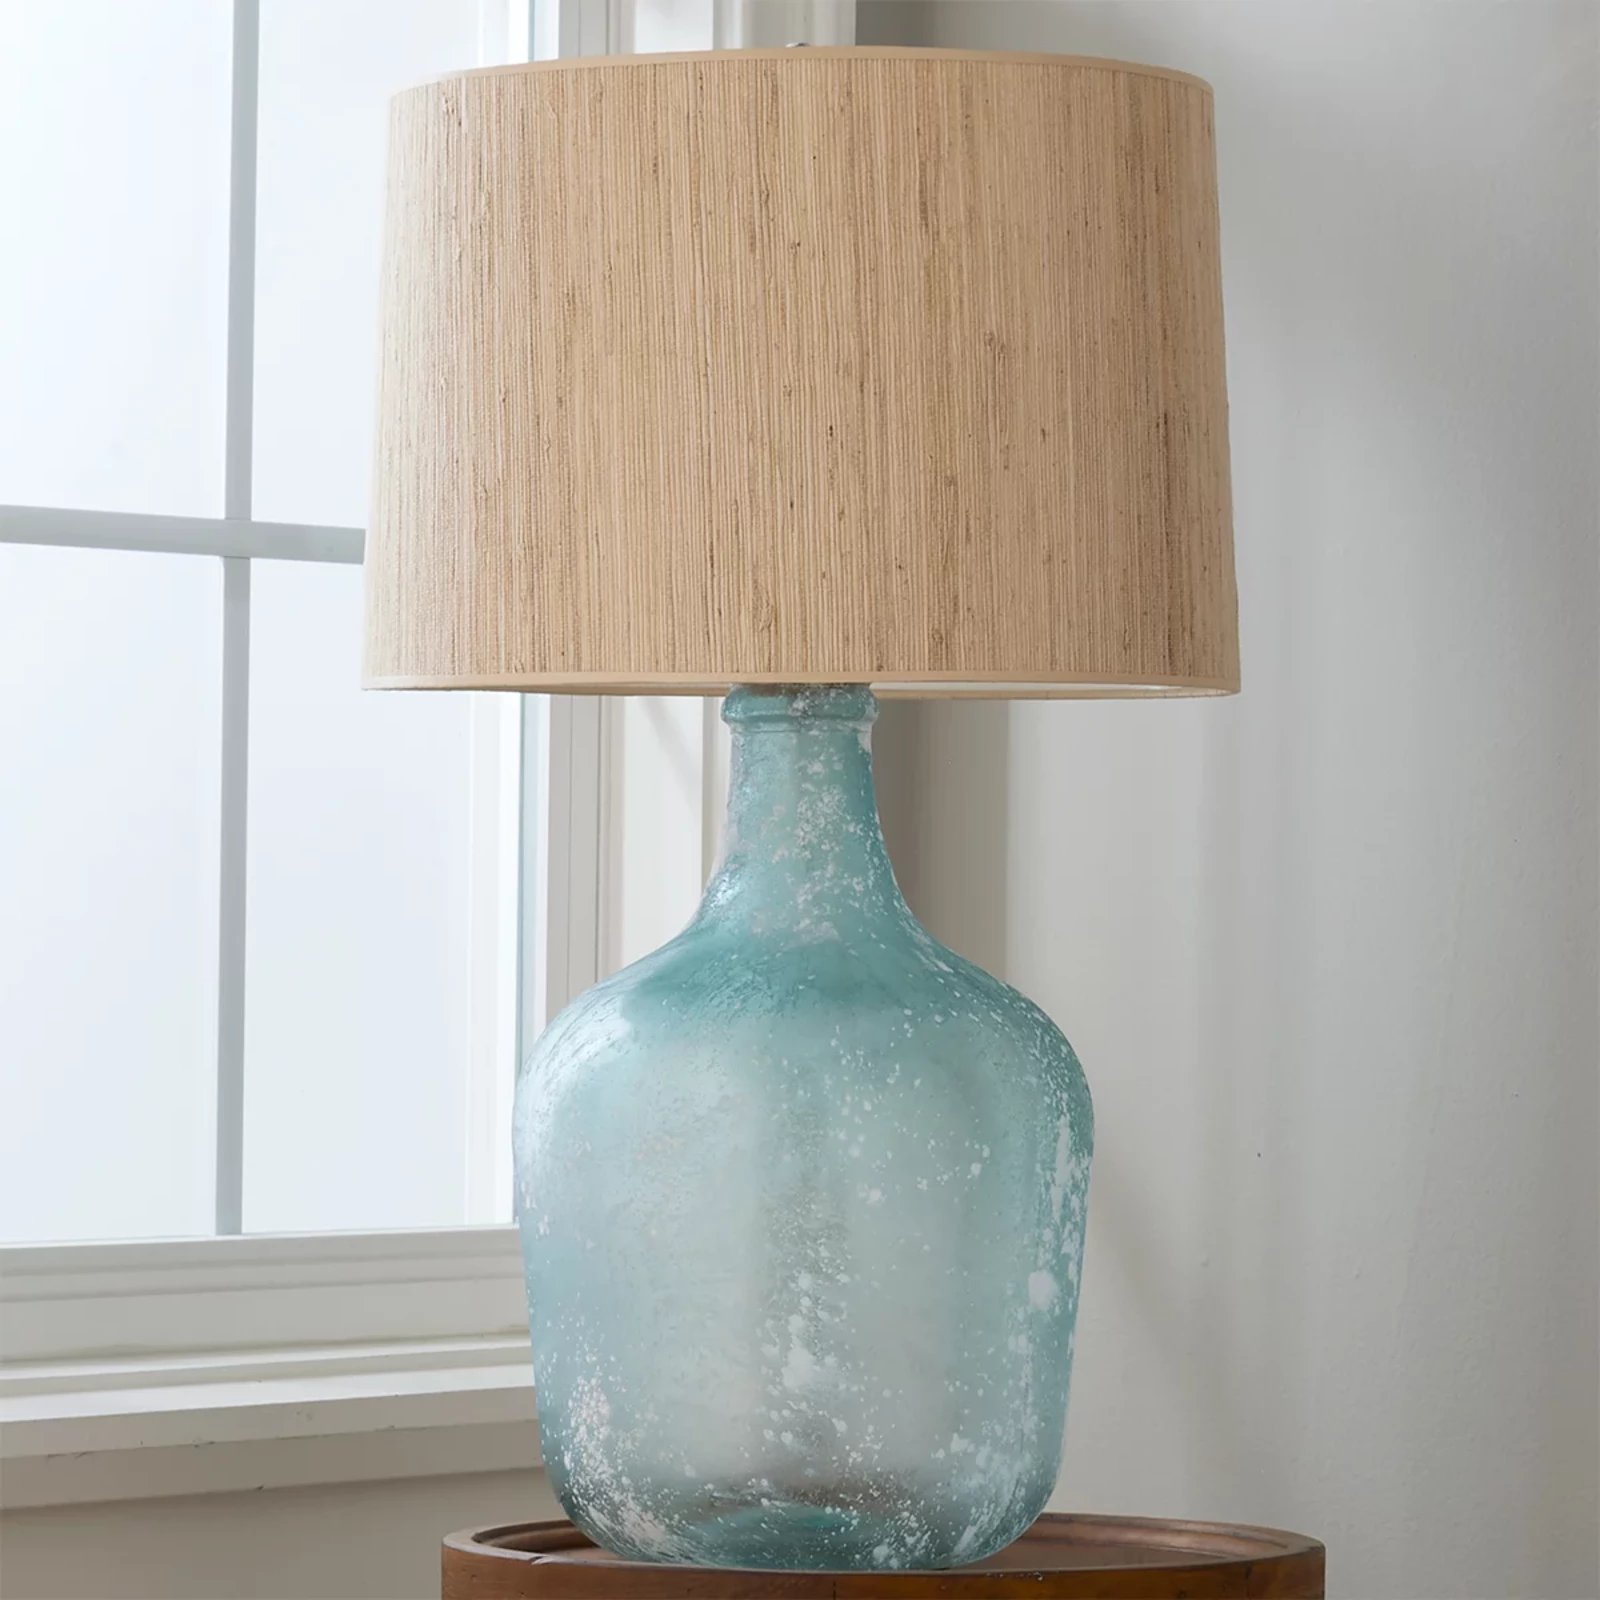 How To Paint A Glass Lamp